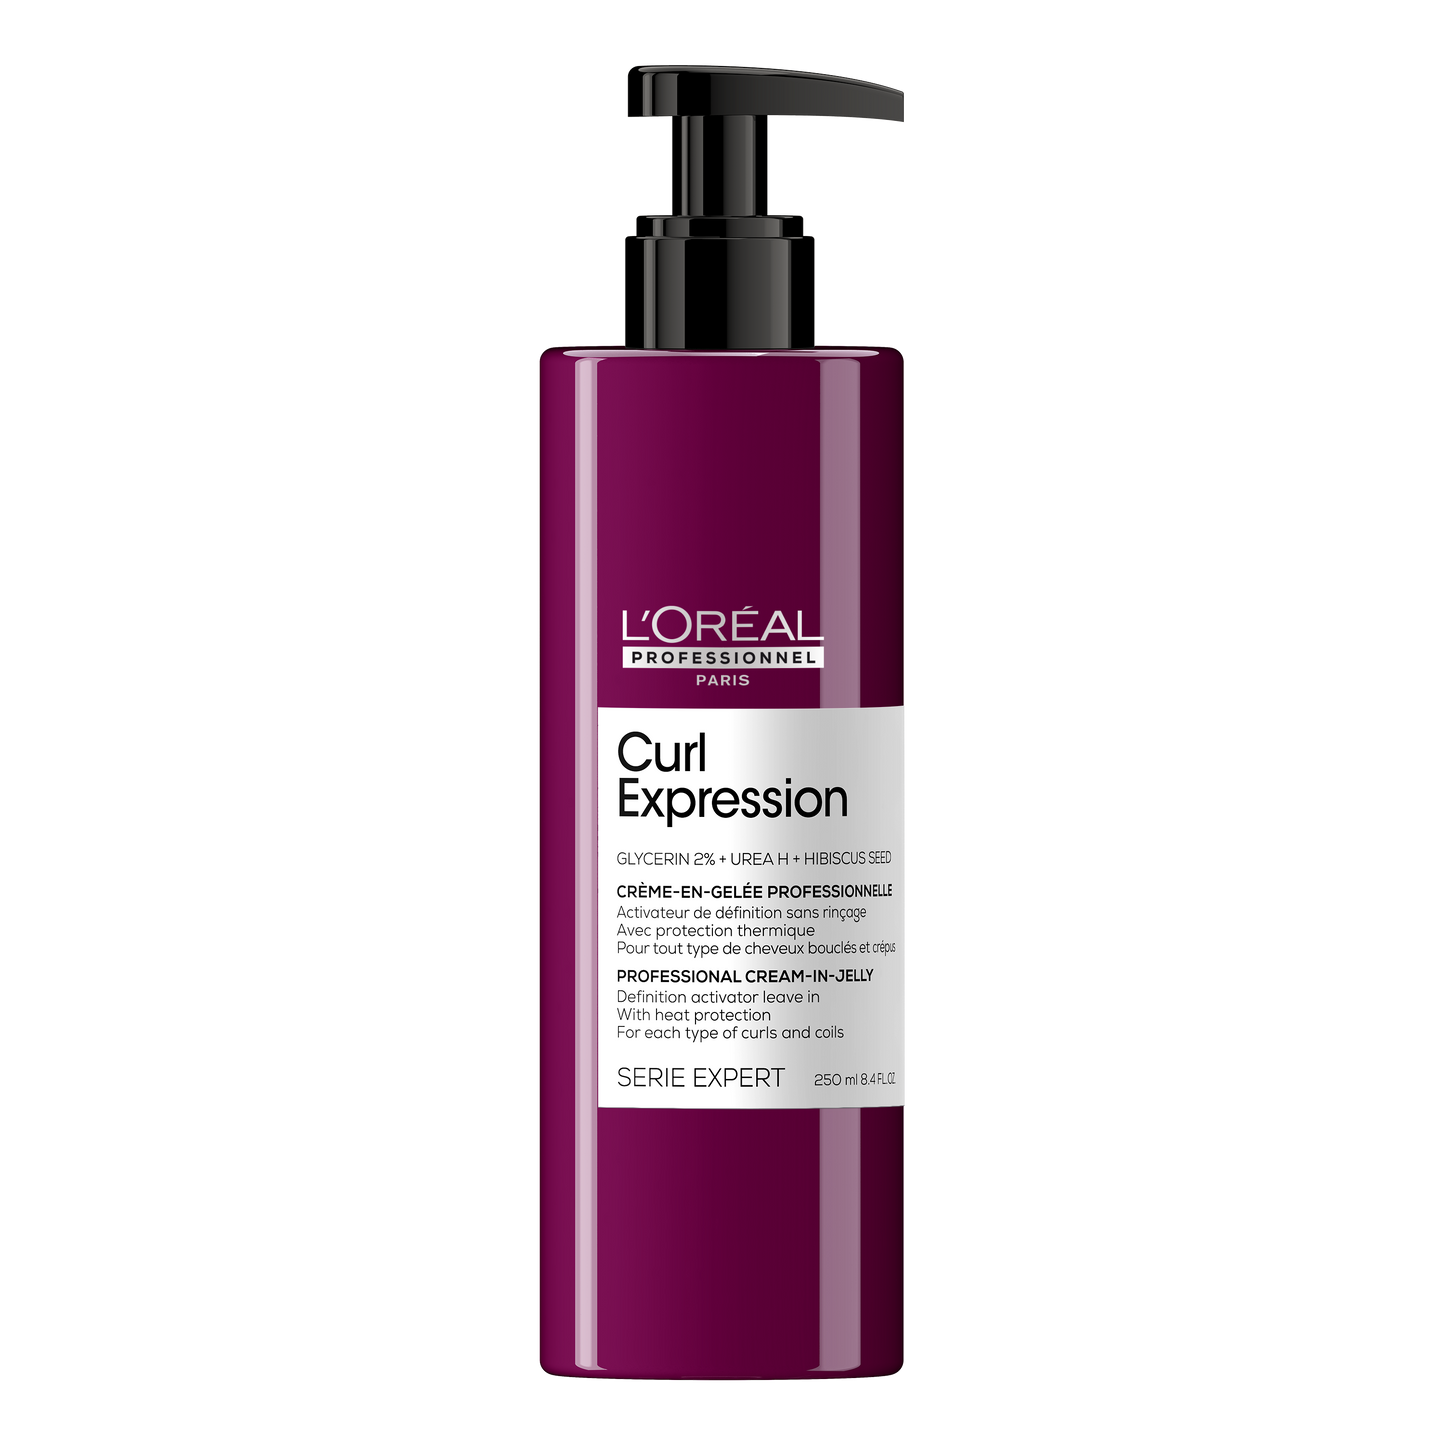 L'Oréal Serie Expert - Curl Expression - Jelly Definition Activator 250ml